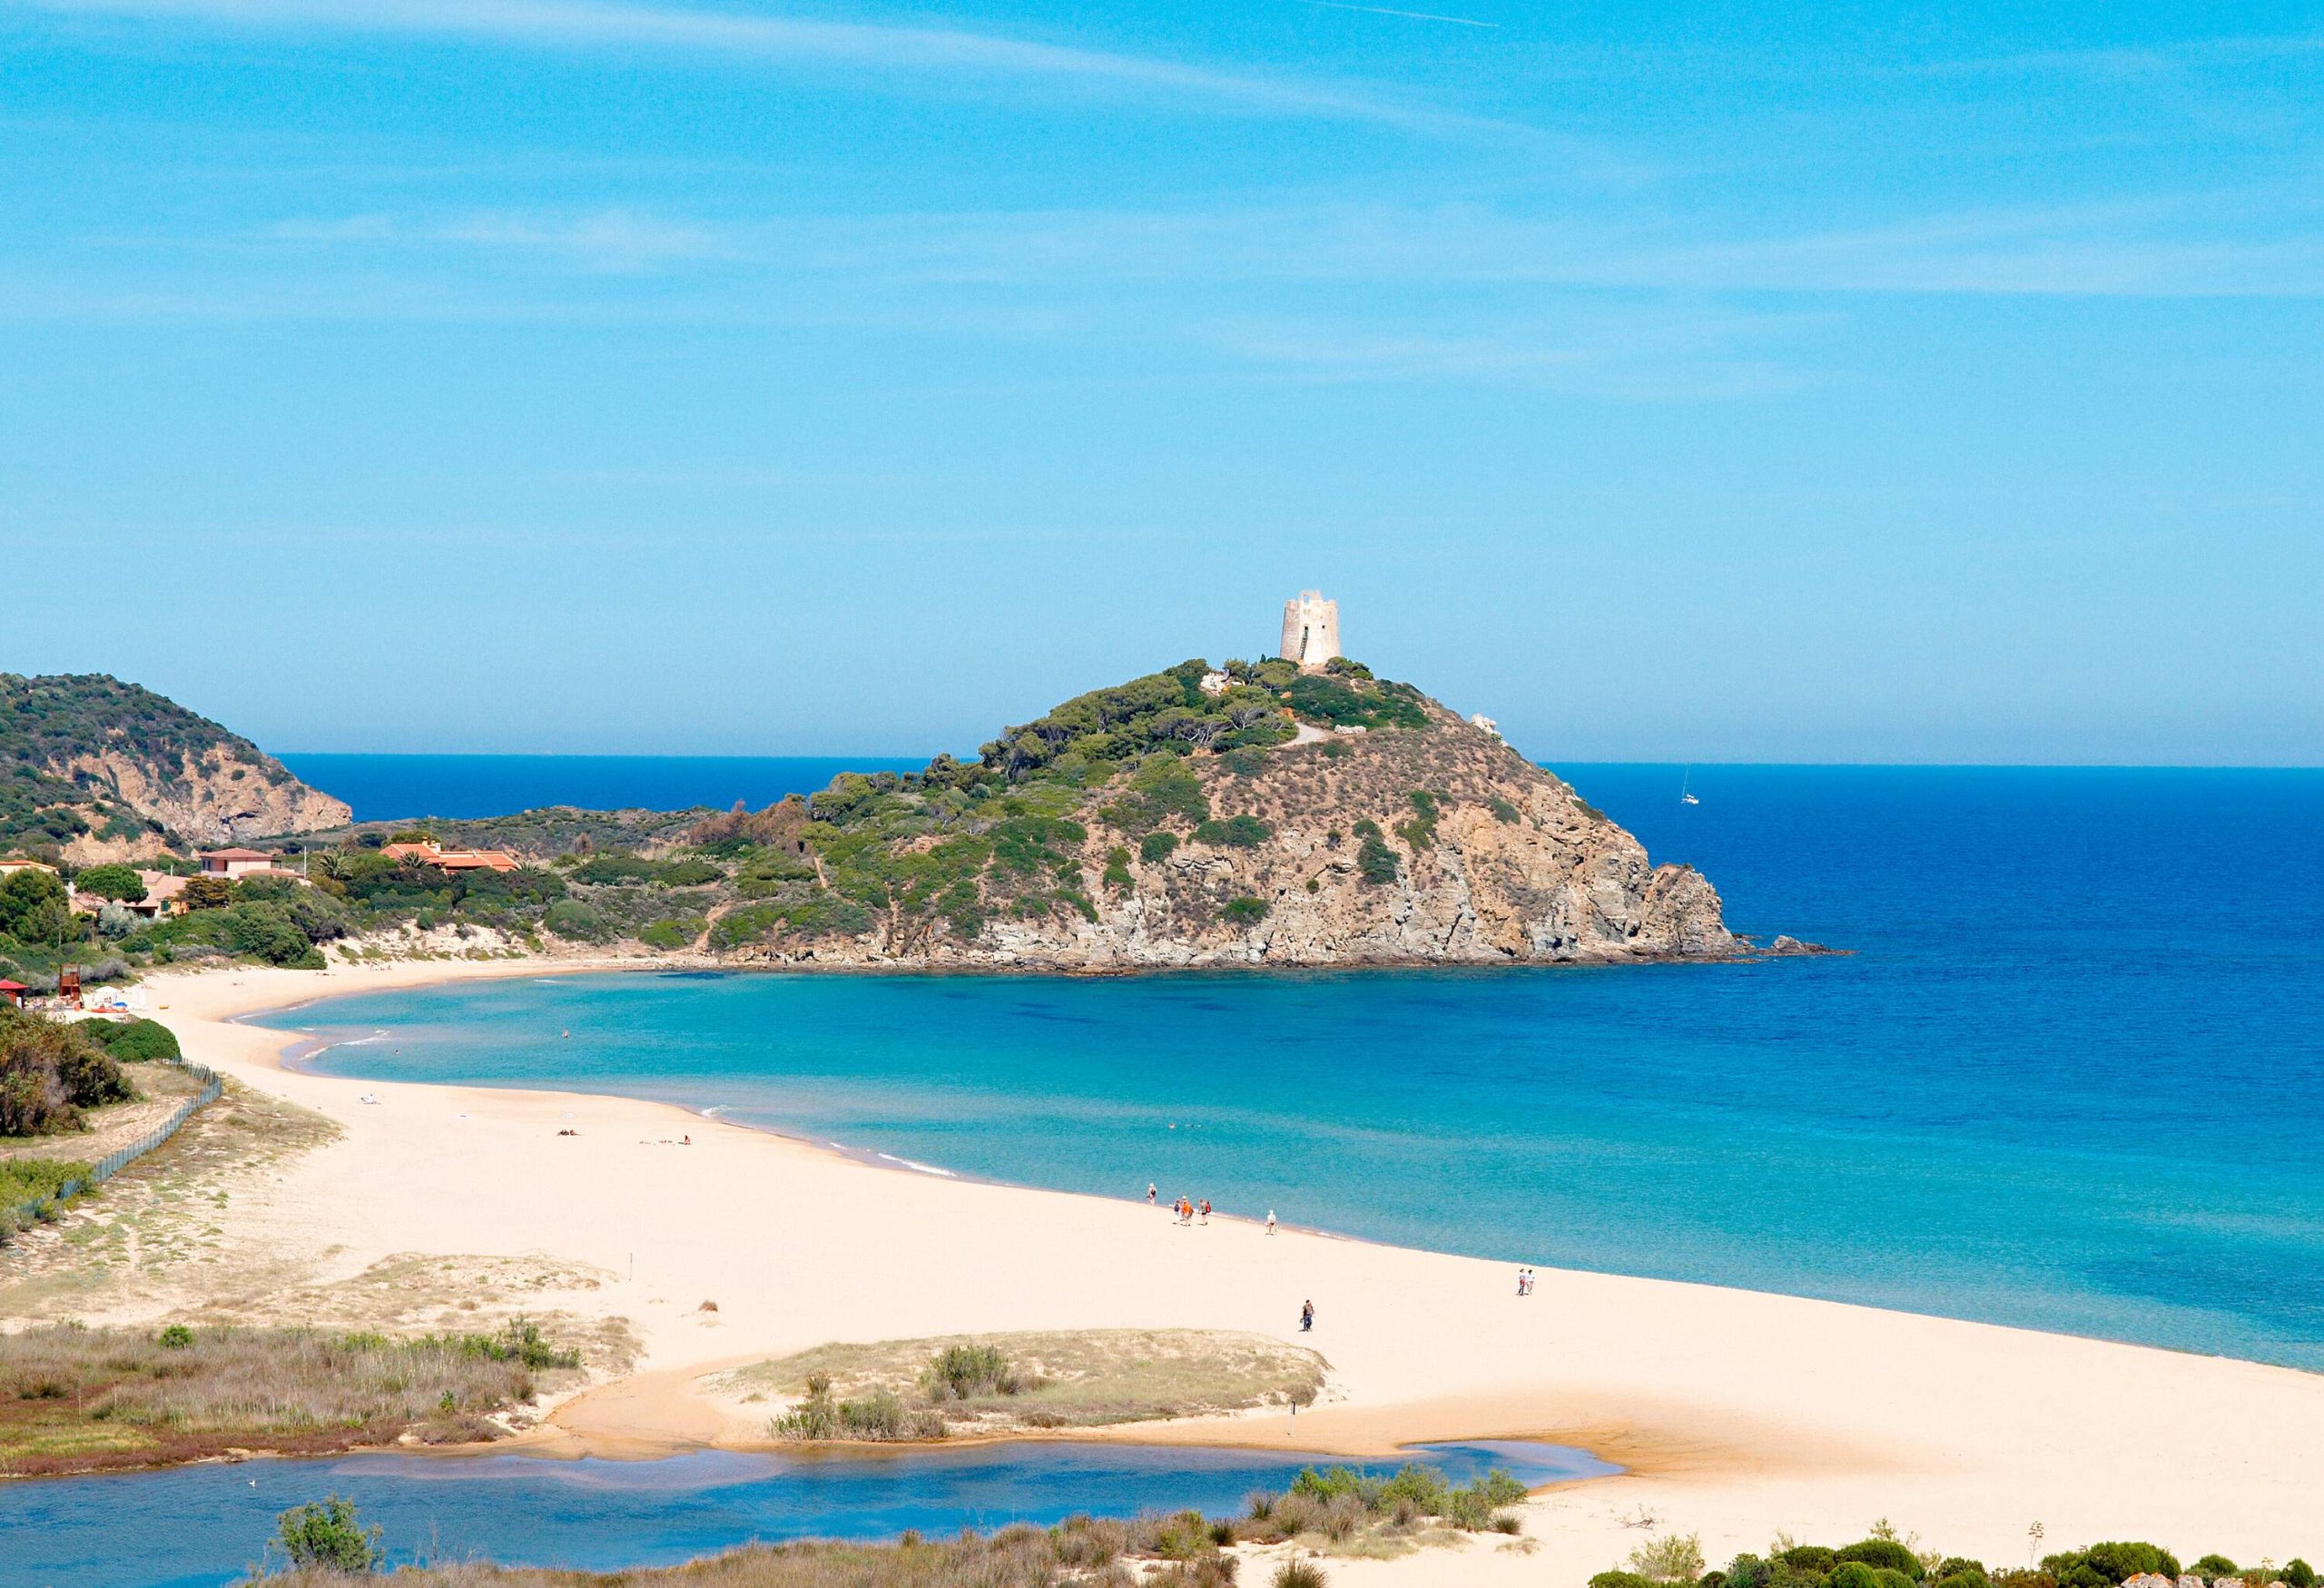 High angle view of white sand beach surrounded by turqoise blue water with mountain and medieval tower in the background